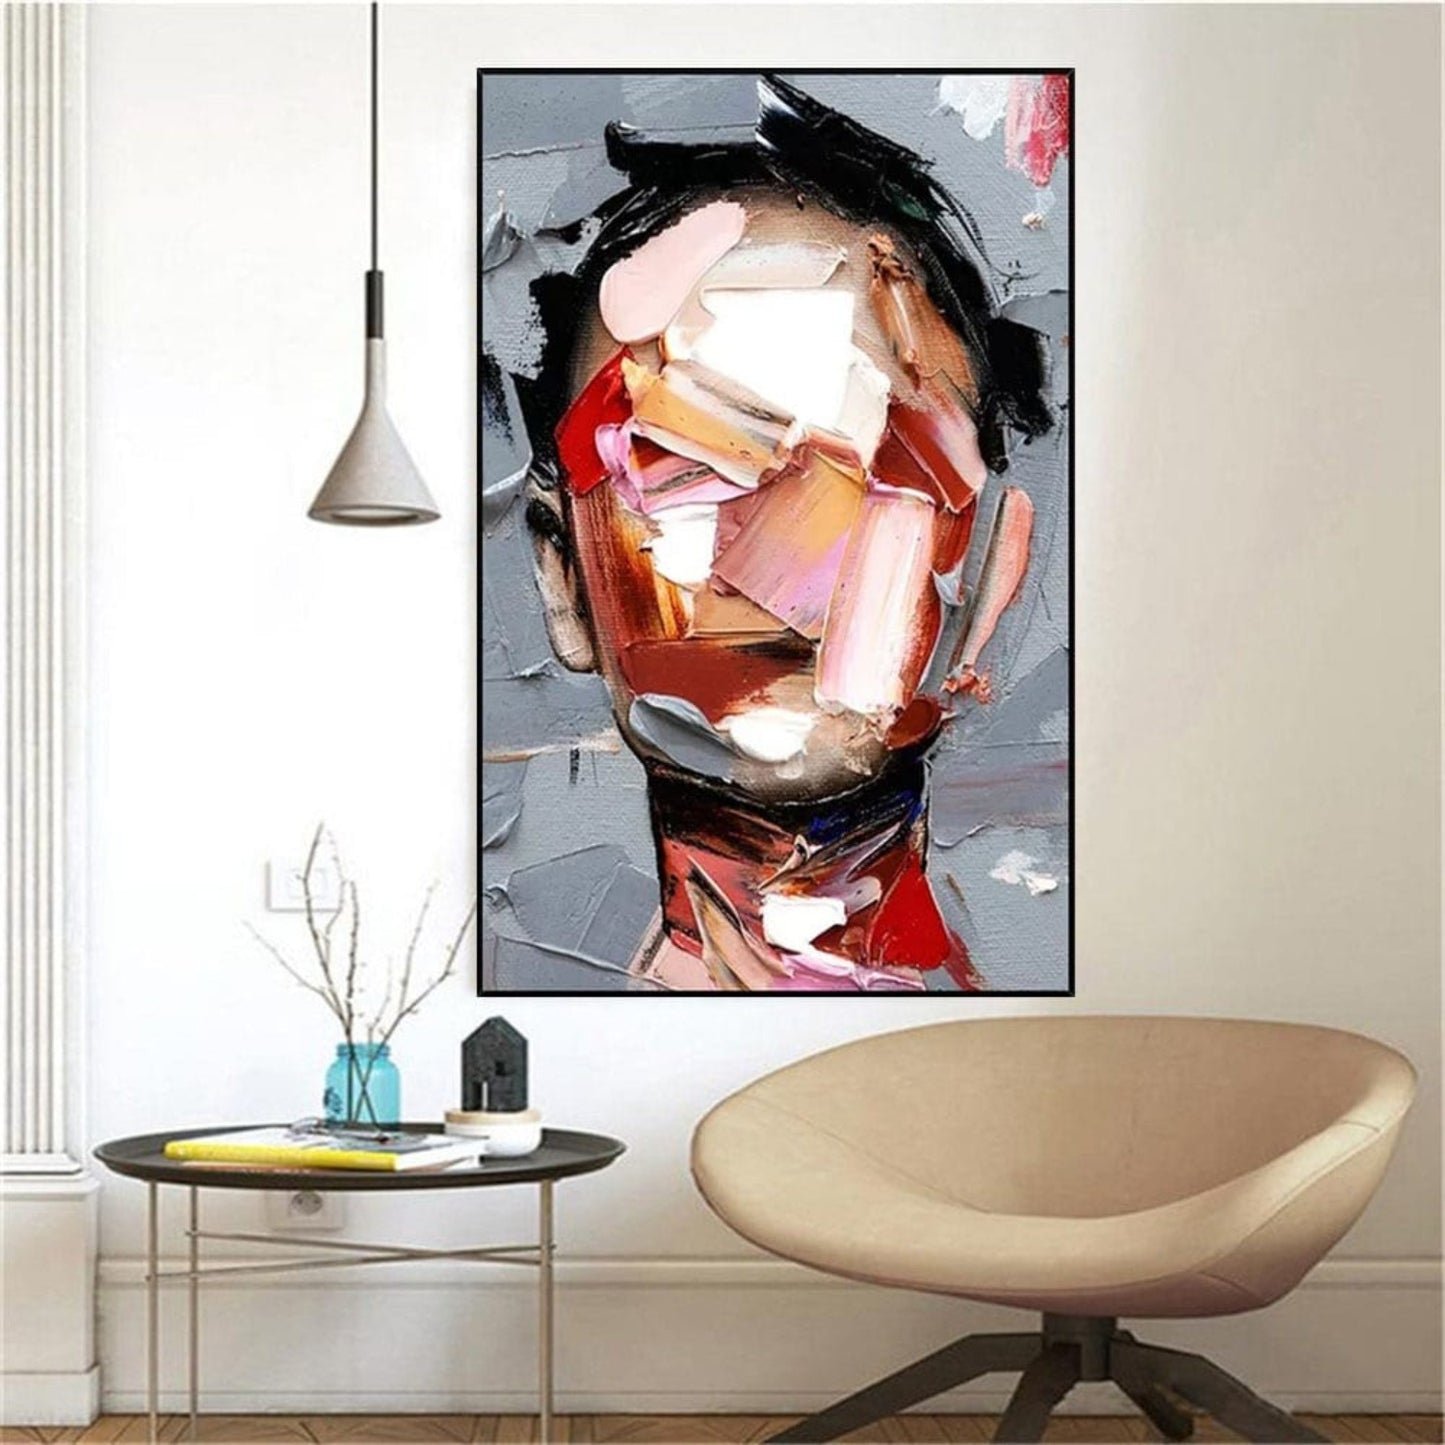 Palette Knife 100% Hand Painted Facial Wall Art